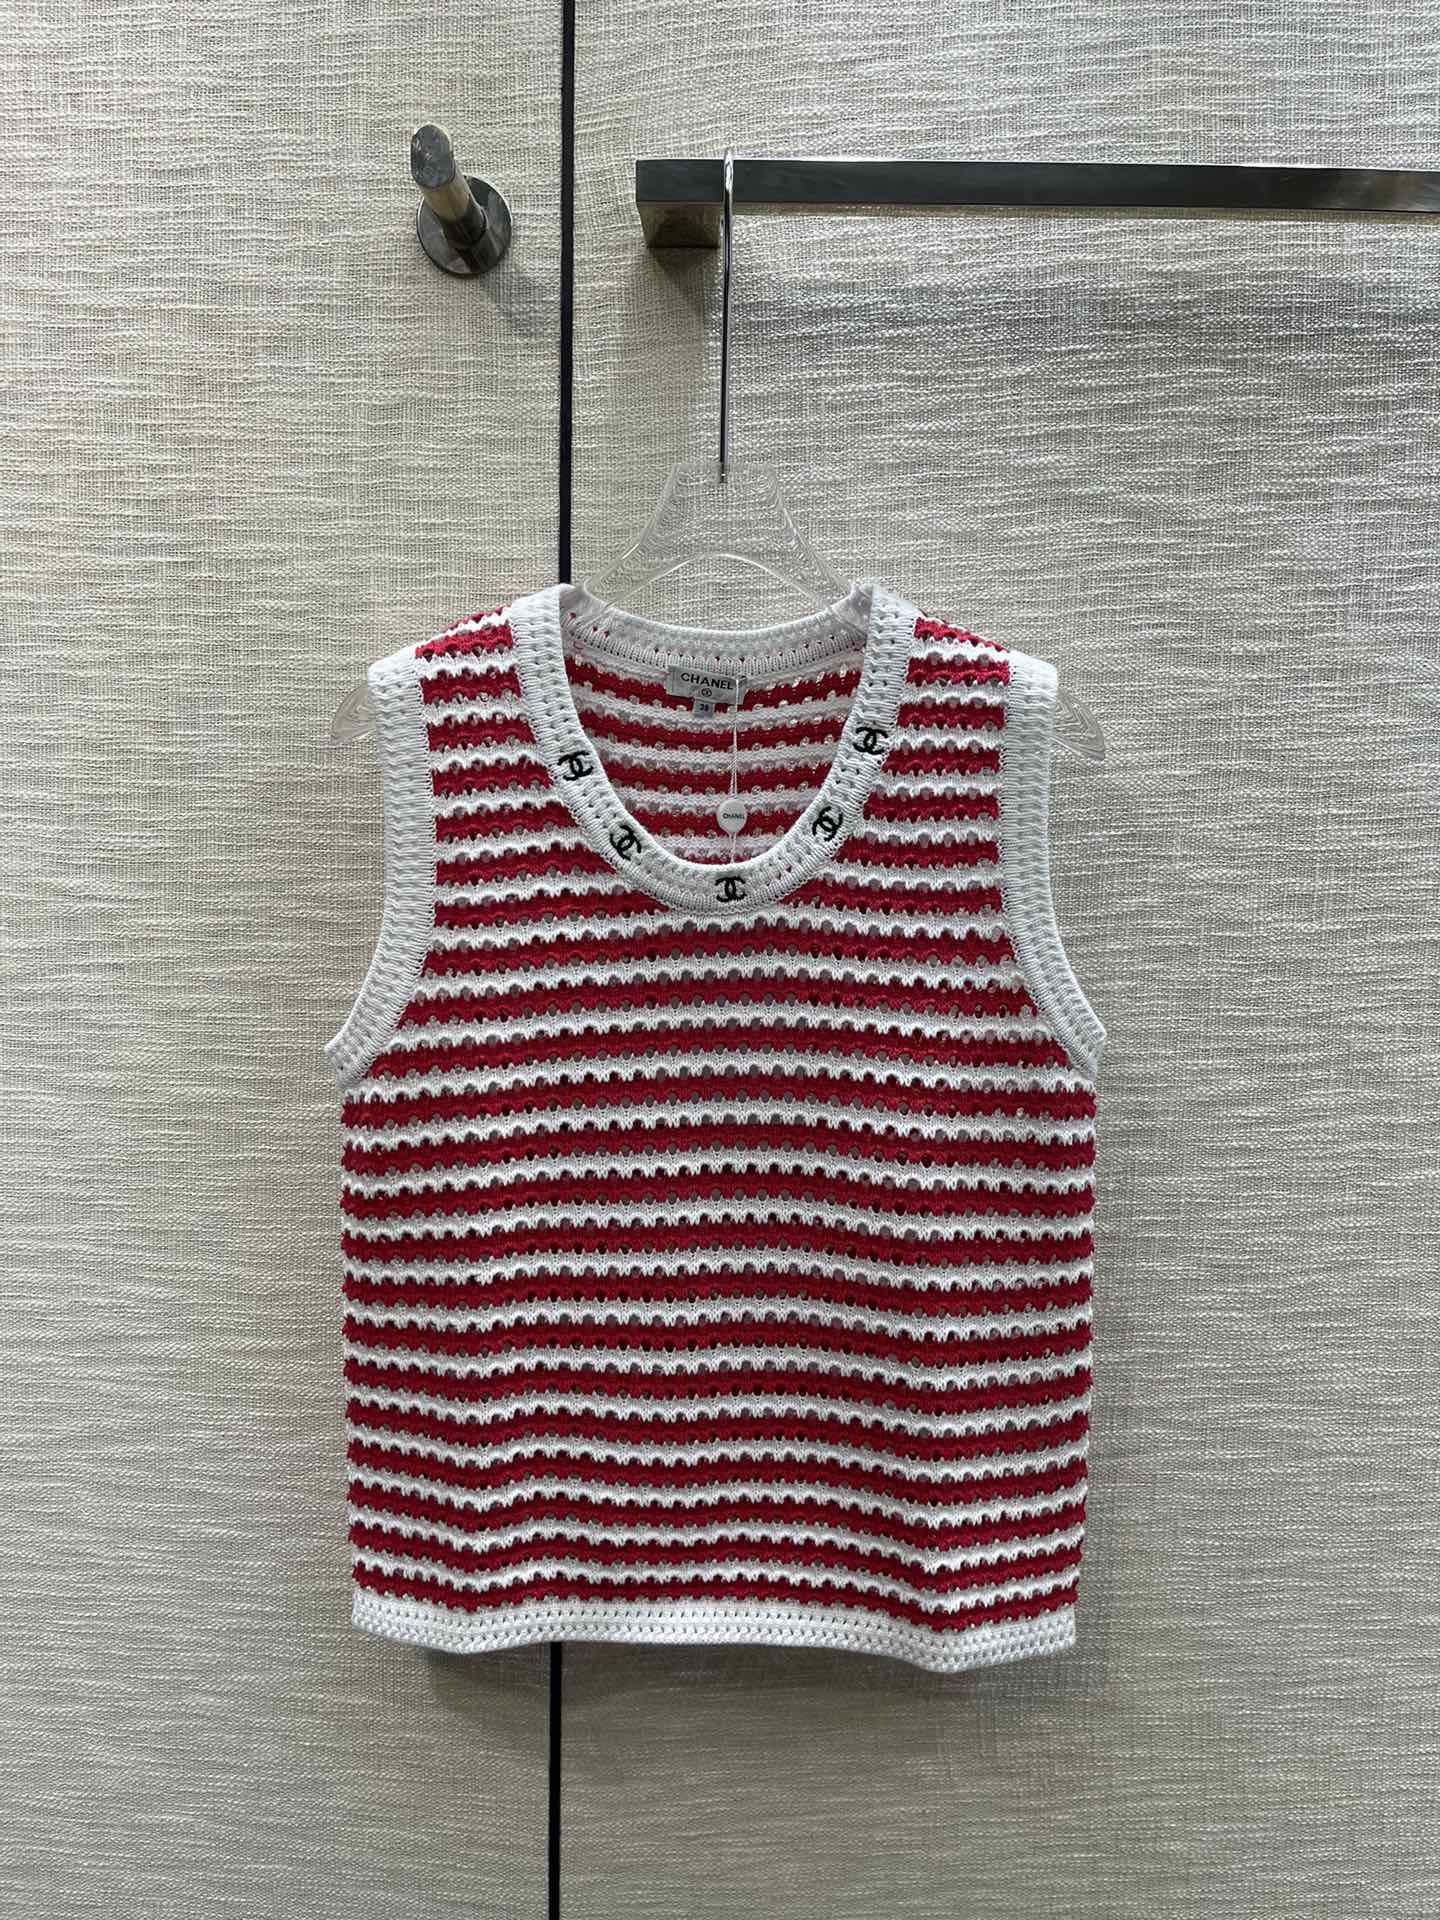 Chanel Clothing Tank Tops&Camis Red White Embroidery Knitting Spring Collection